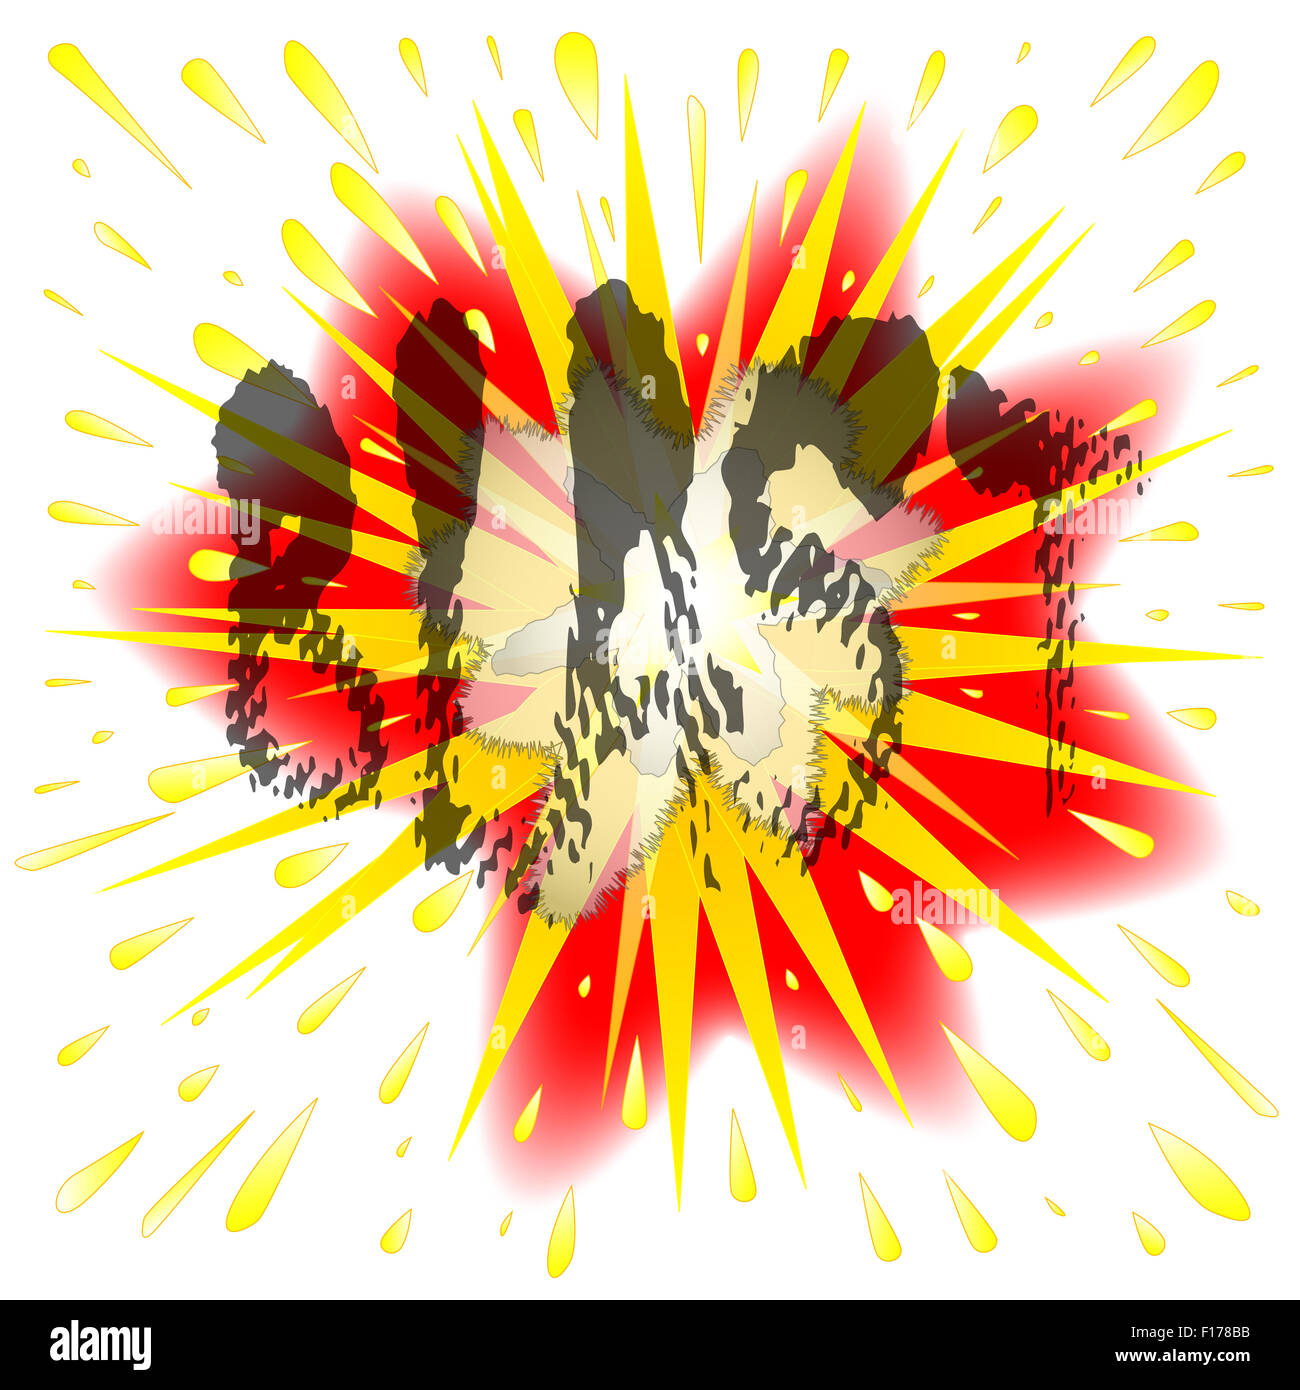 Abstract cartoon style blast explosion over a white background Stock Photo